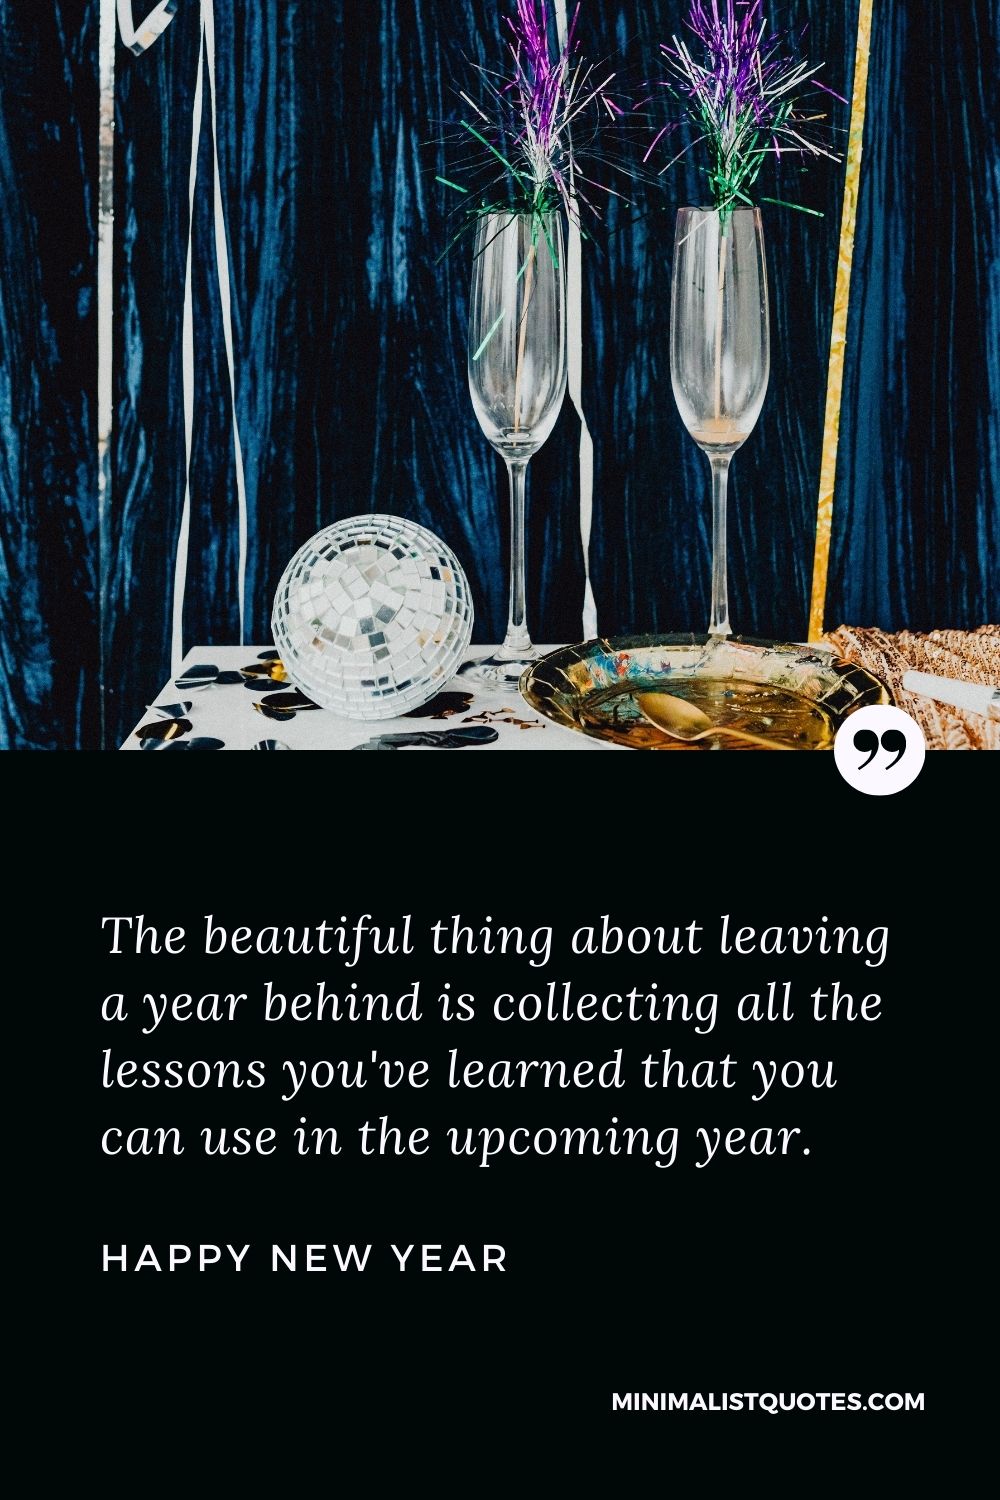 New Year Wish & Message with HD Image: The beautiful thing about leaving a year behind is collecting all the lessons you've learned that you can use in the upcoming year. Happy New Year!